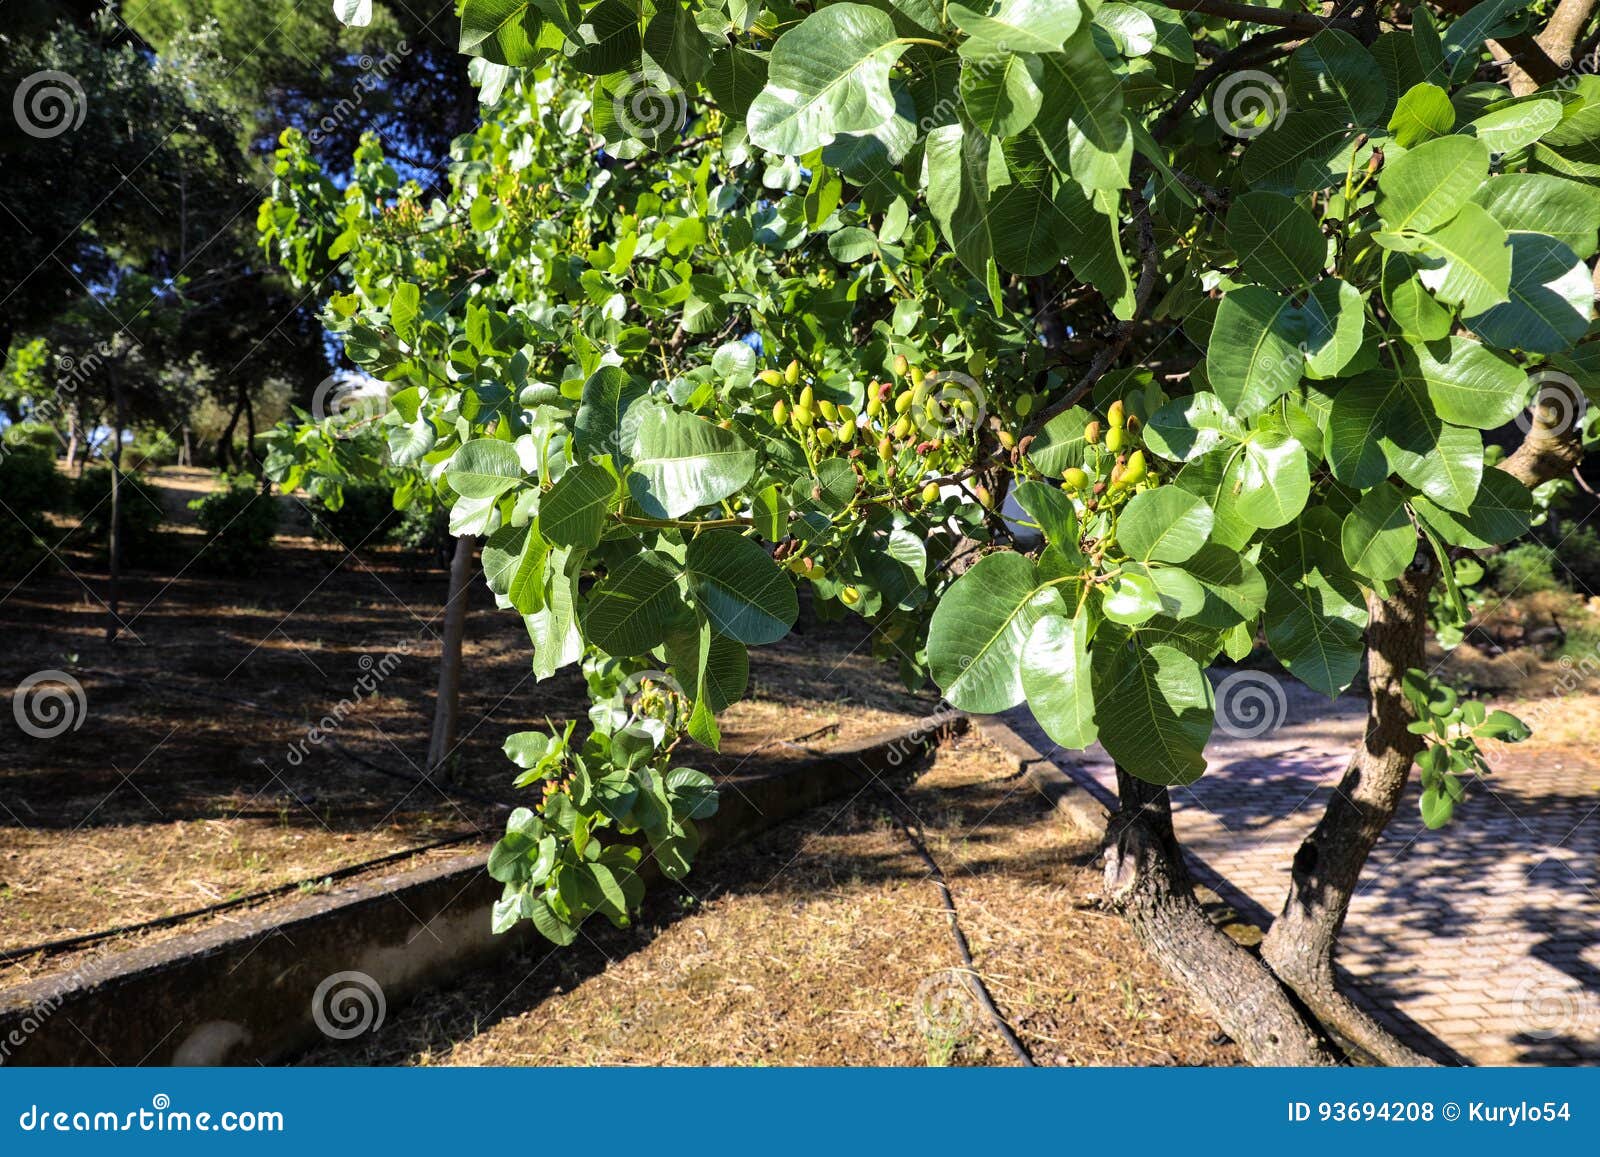 Growing Pistachios on the Branches of Pistachio Tree. Stock Photo ...